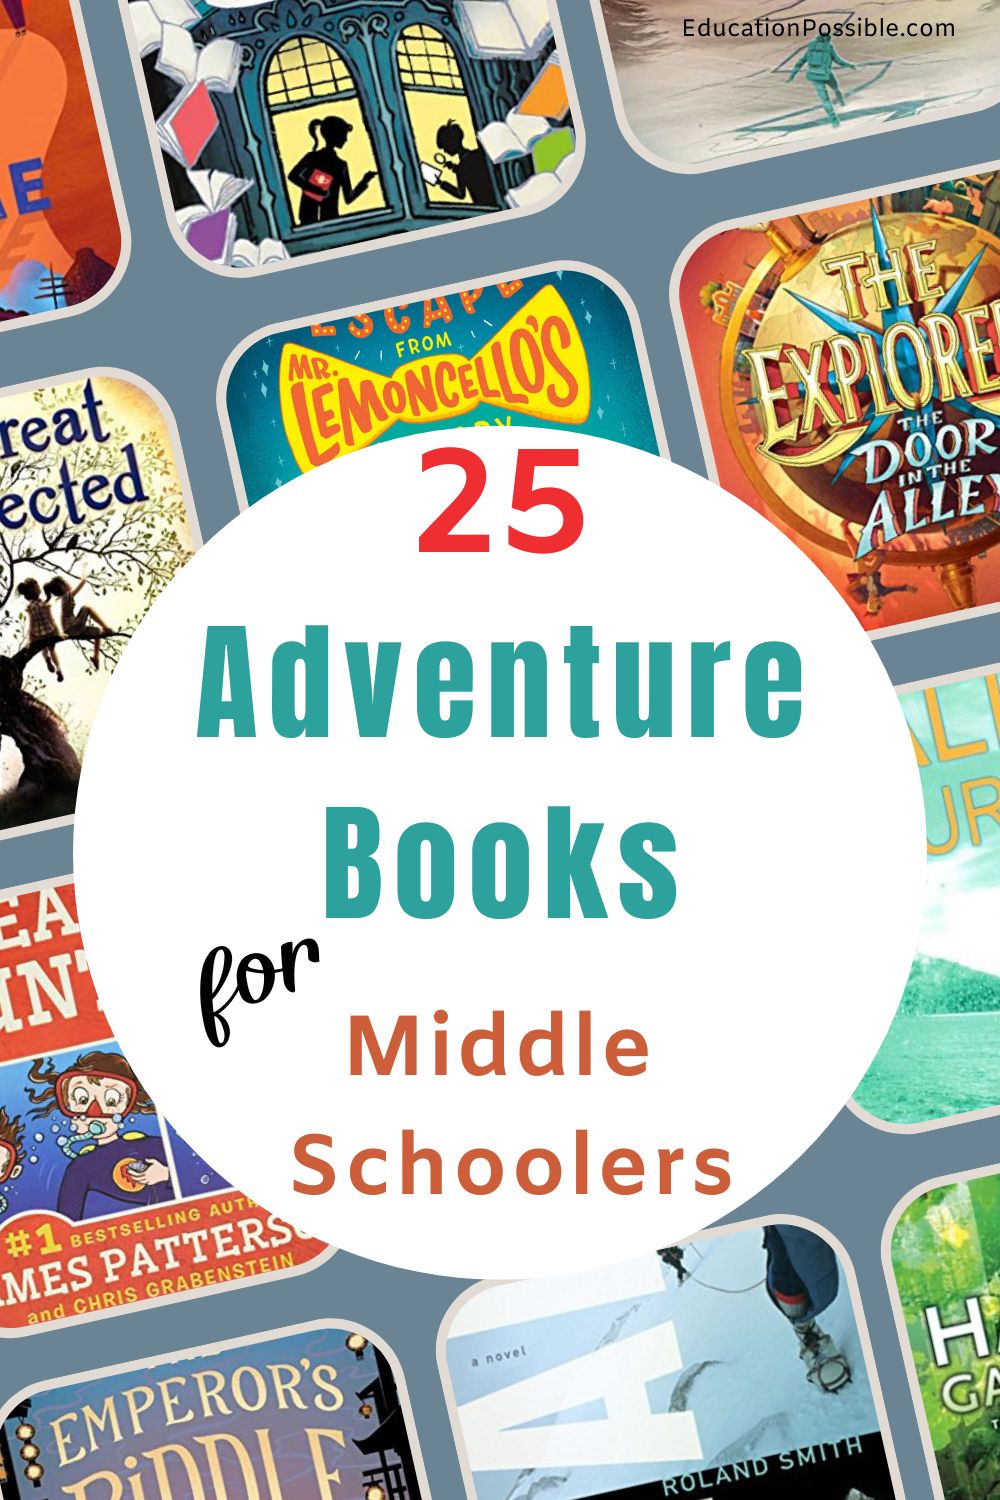 Adventure Books for Middle Schoolers